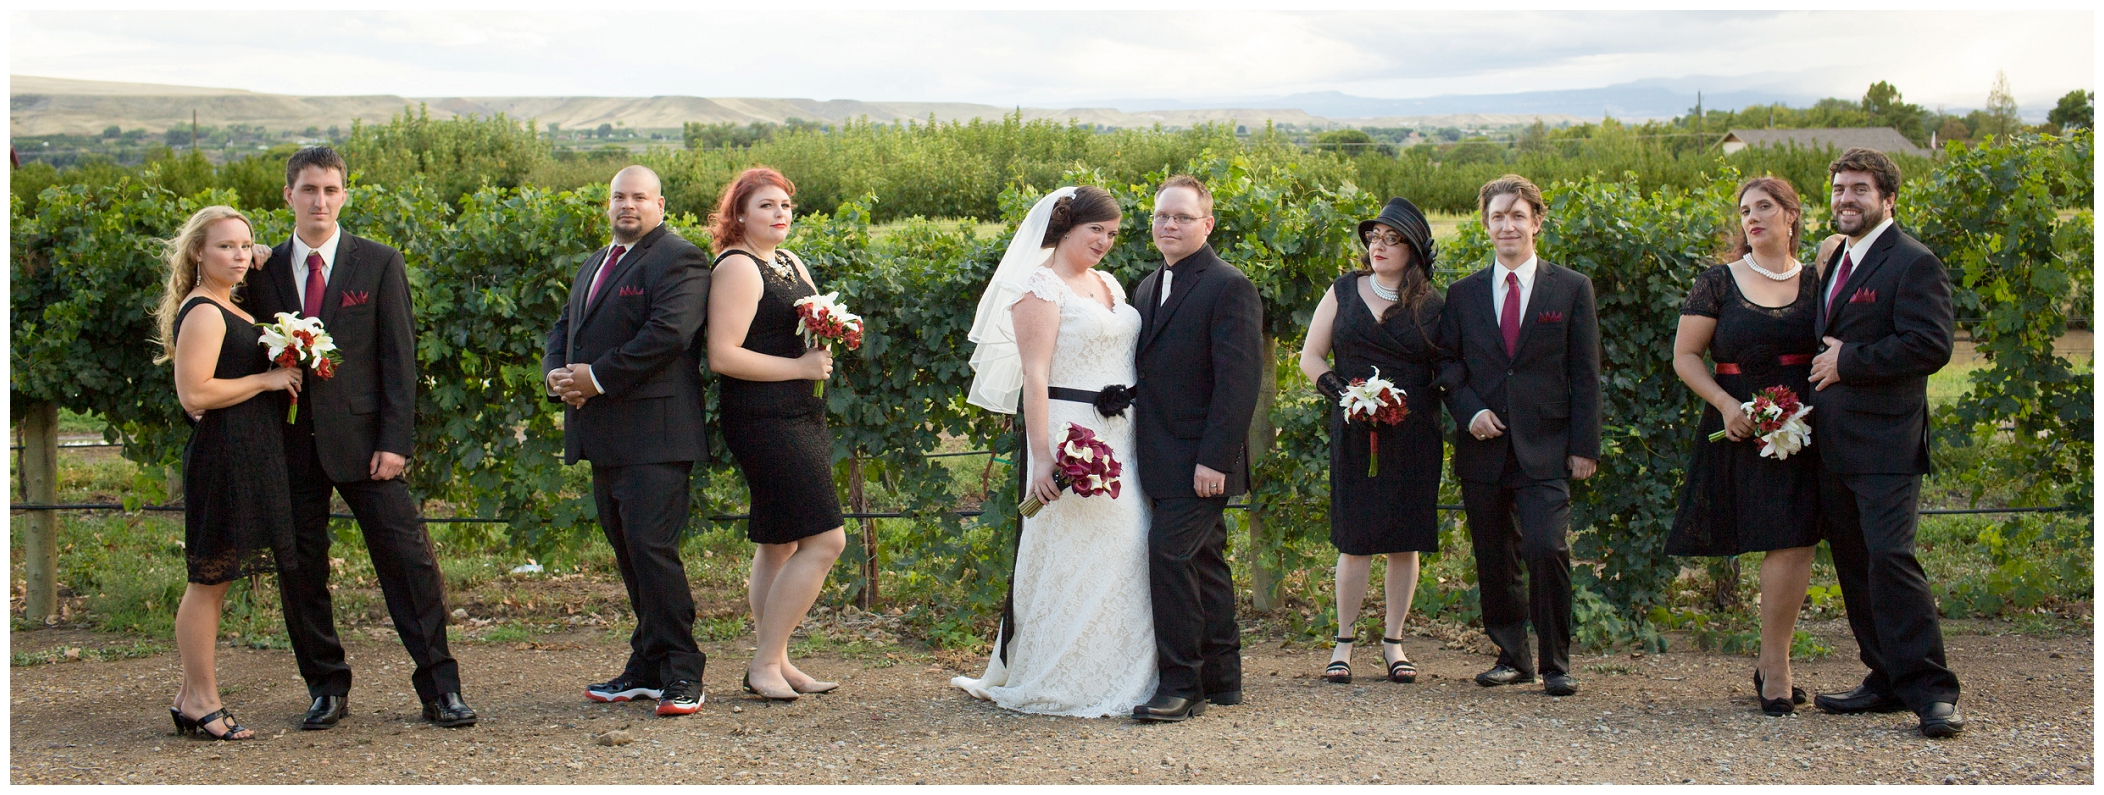 picture of bridal party at vineyard wedding